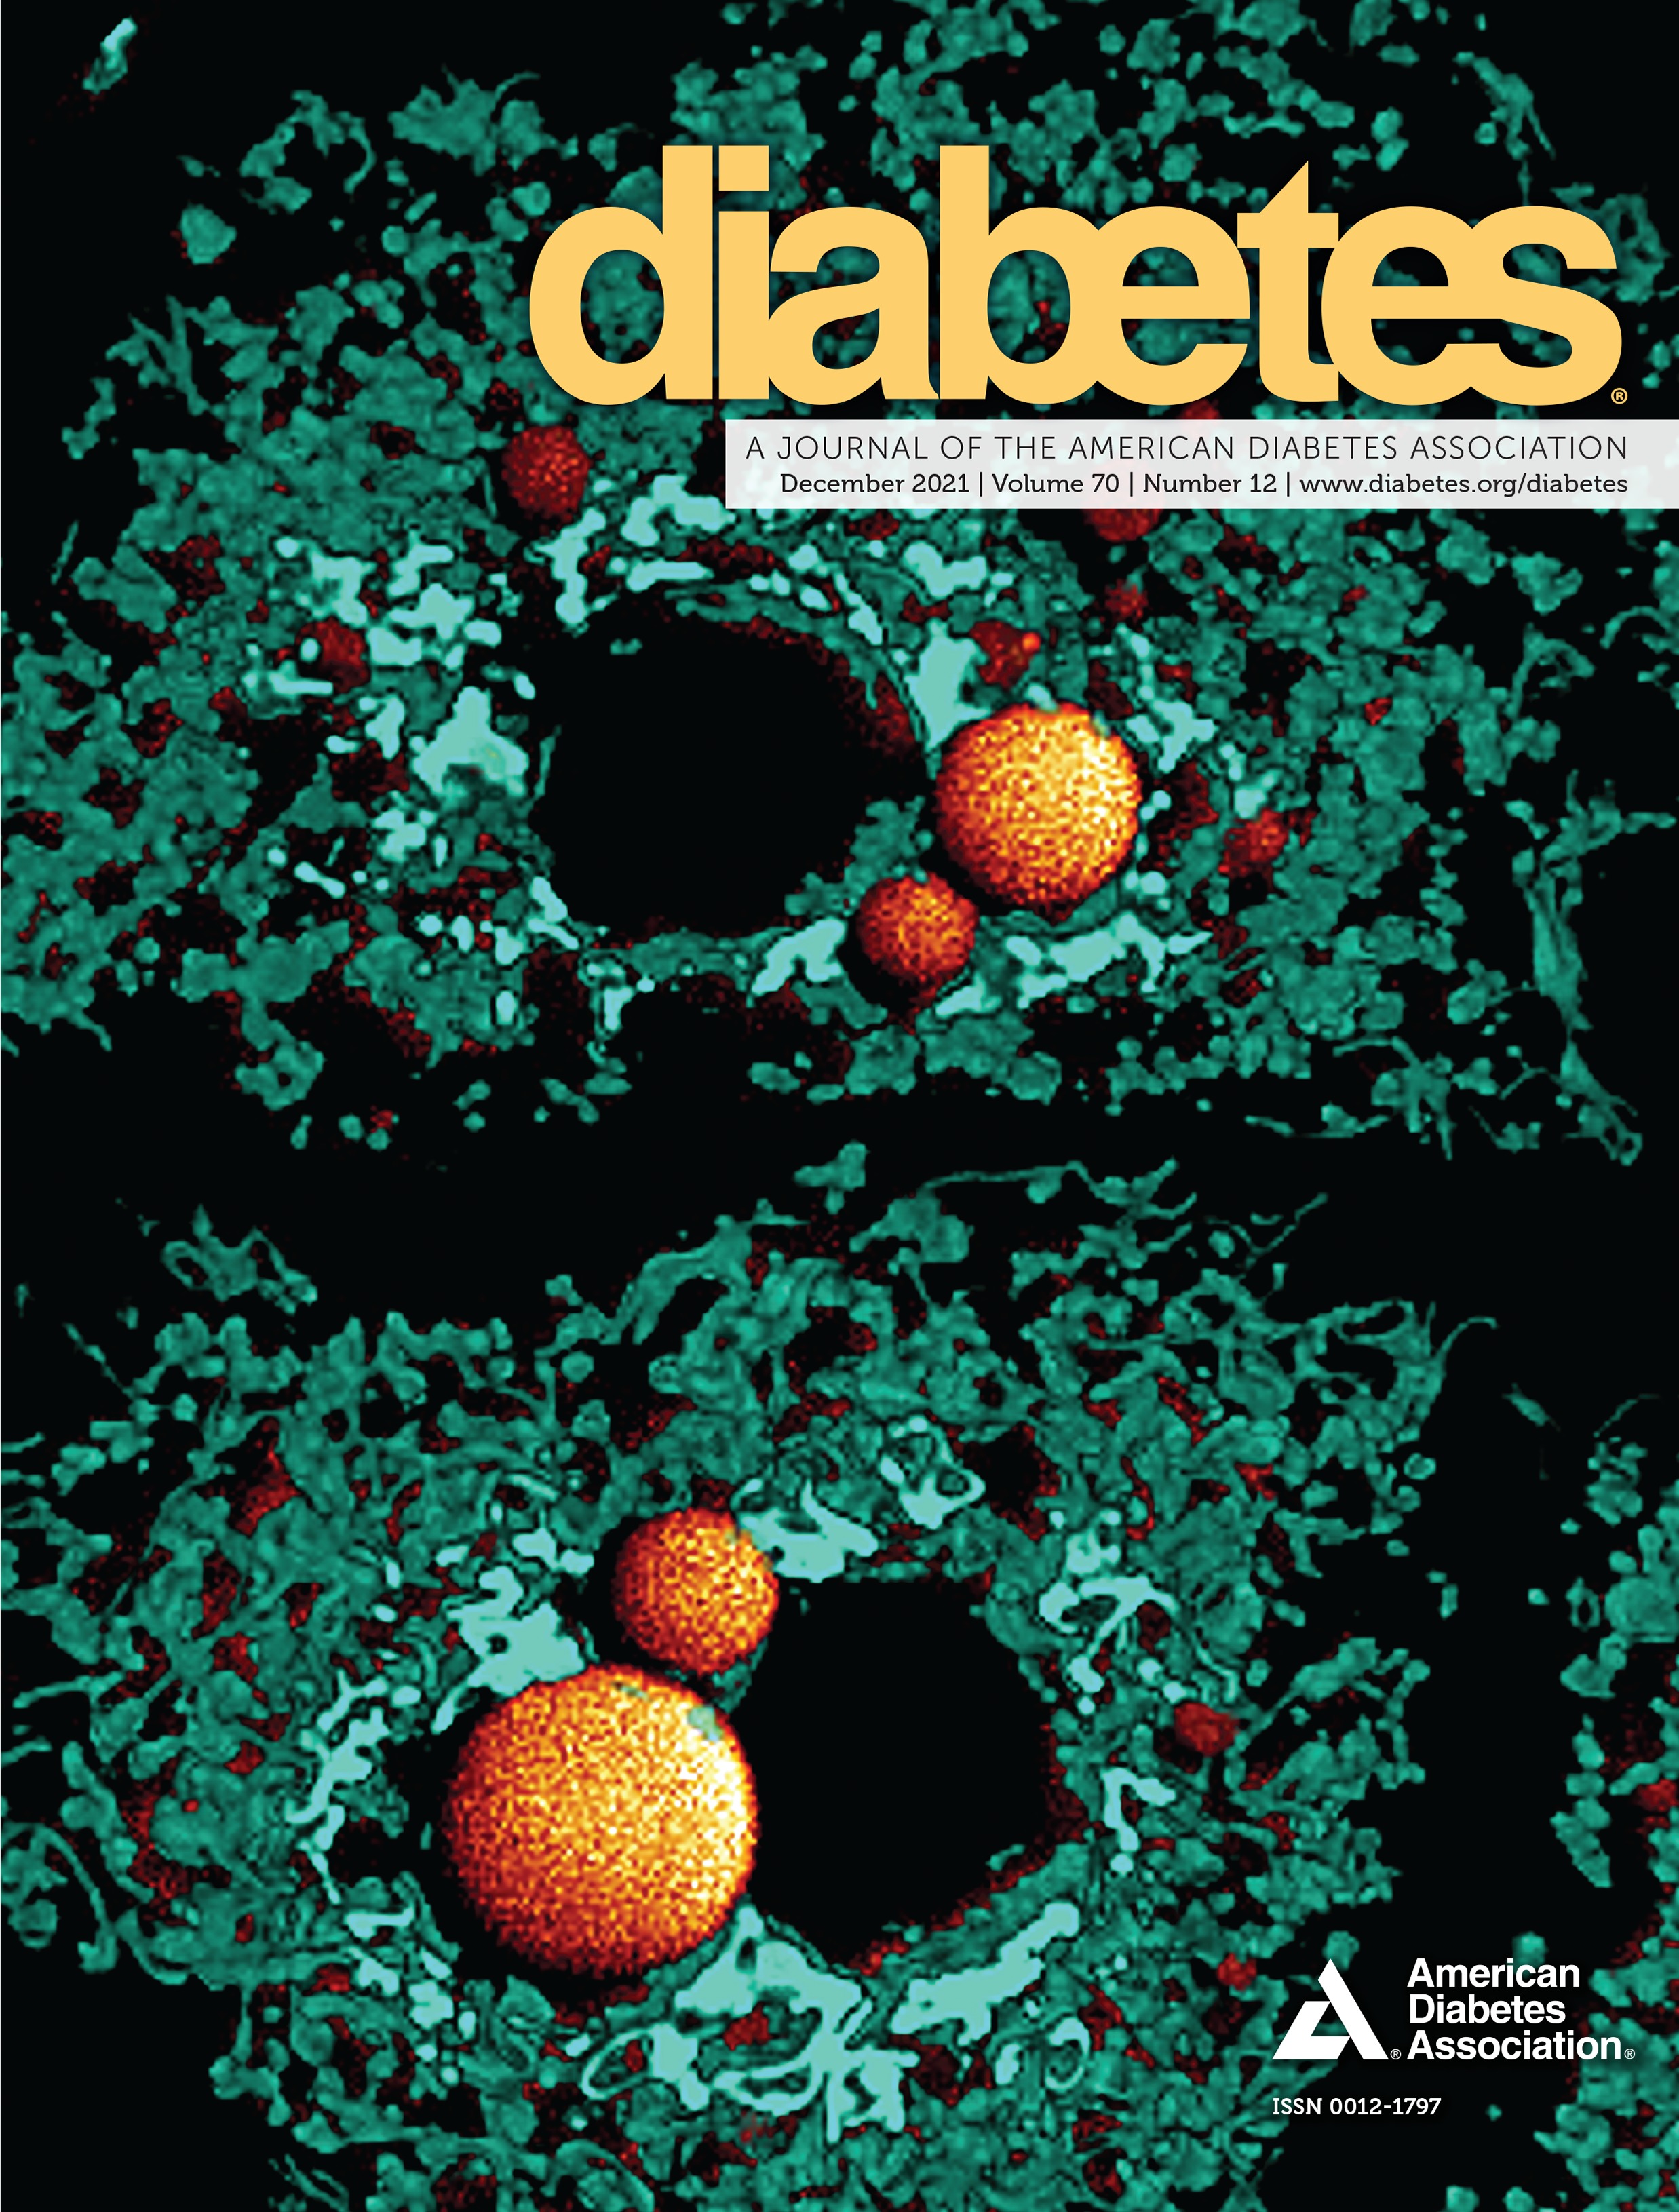 Reduced Follicular Regulatory T Cells in Spleen and Pancreatic Lymph Nodes of Patients With Type 1 Diabetes